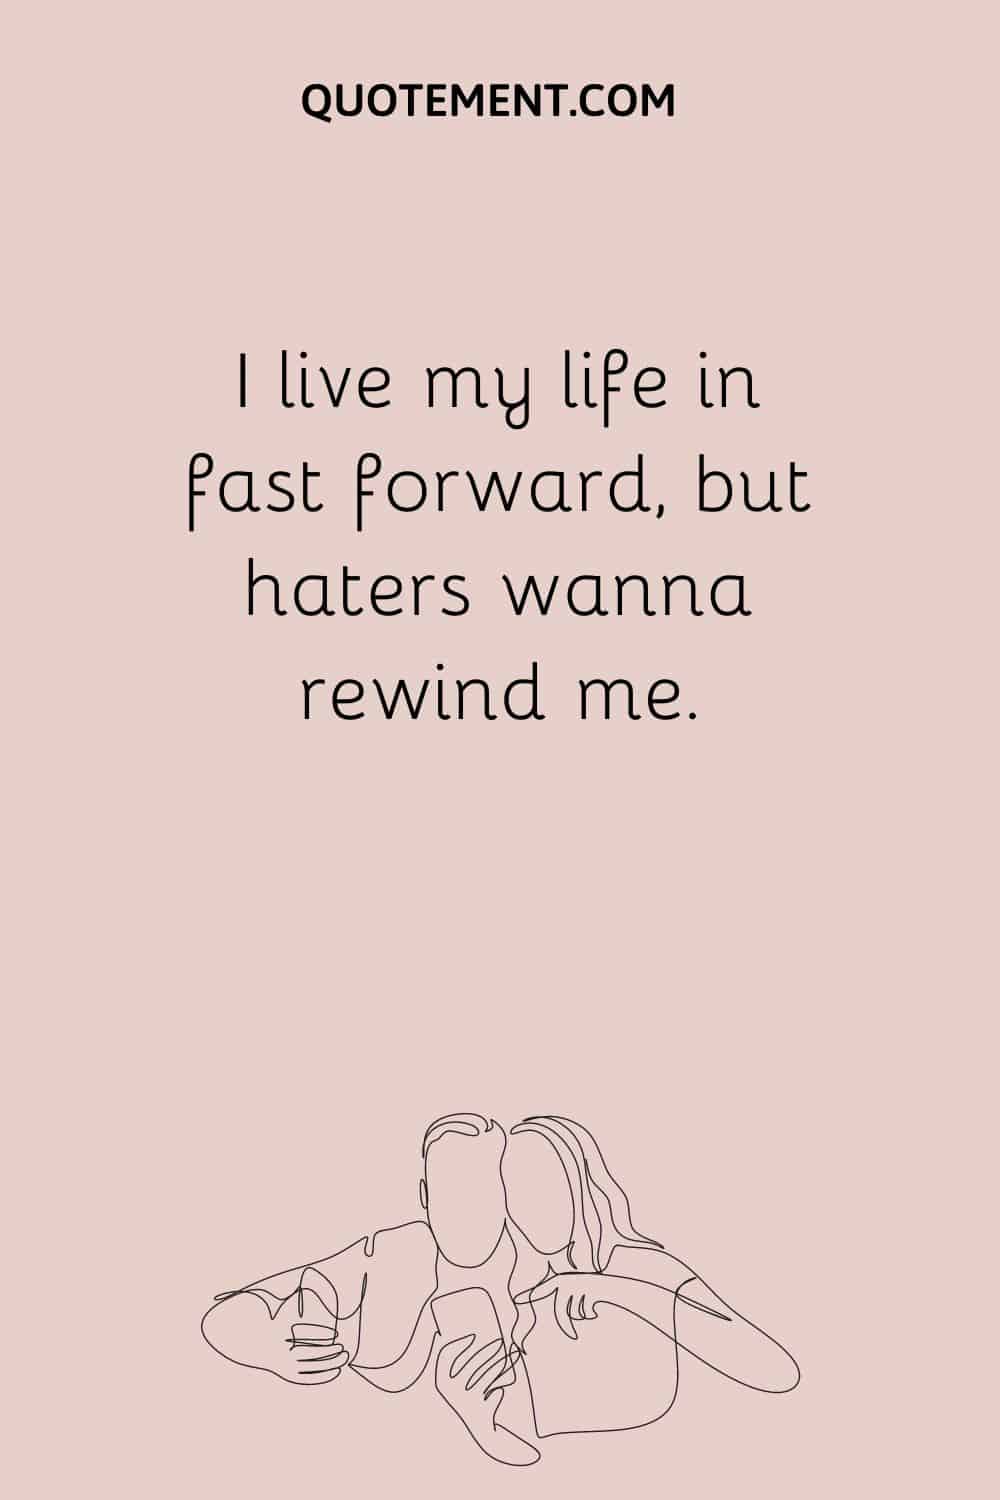 I live my life in fast forward, but haters wanna rewind me